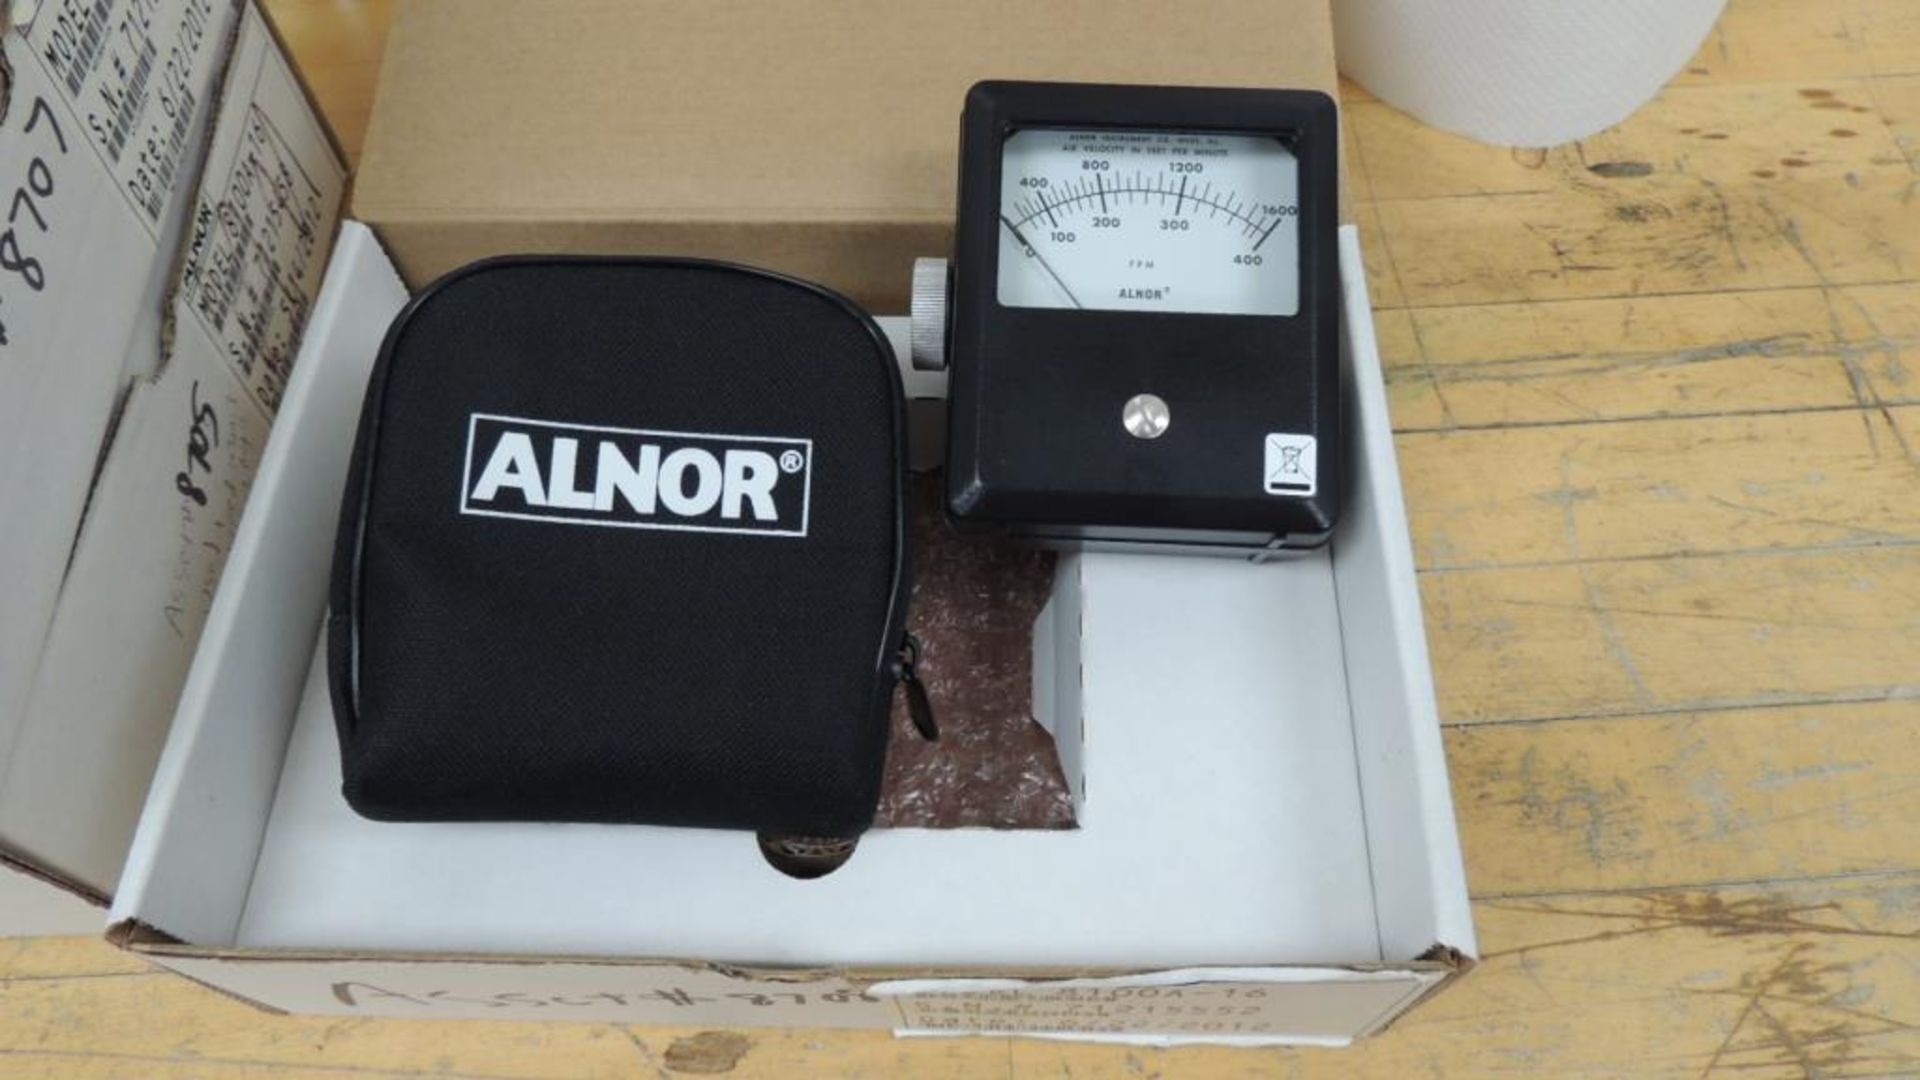 Alnor 8100A-16 Gauge; Lot: (5) The Velometer Jr.® anemometer measures low face velocity commonly